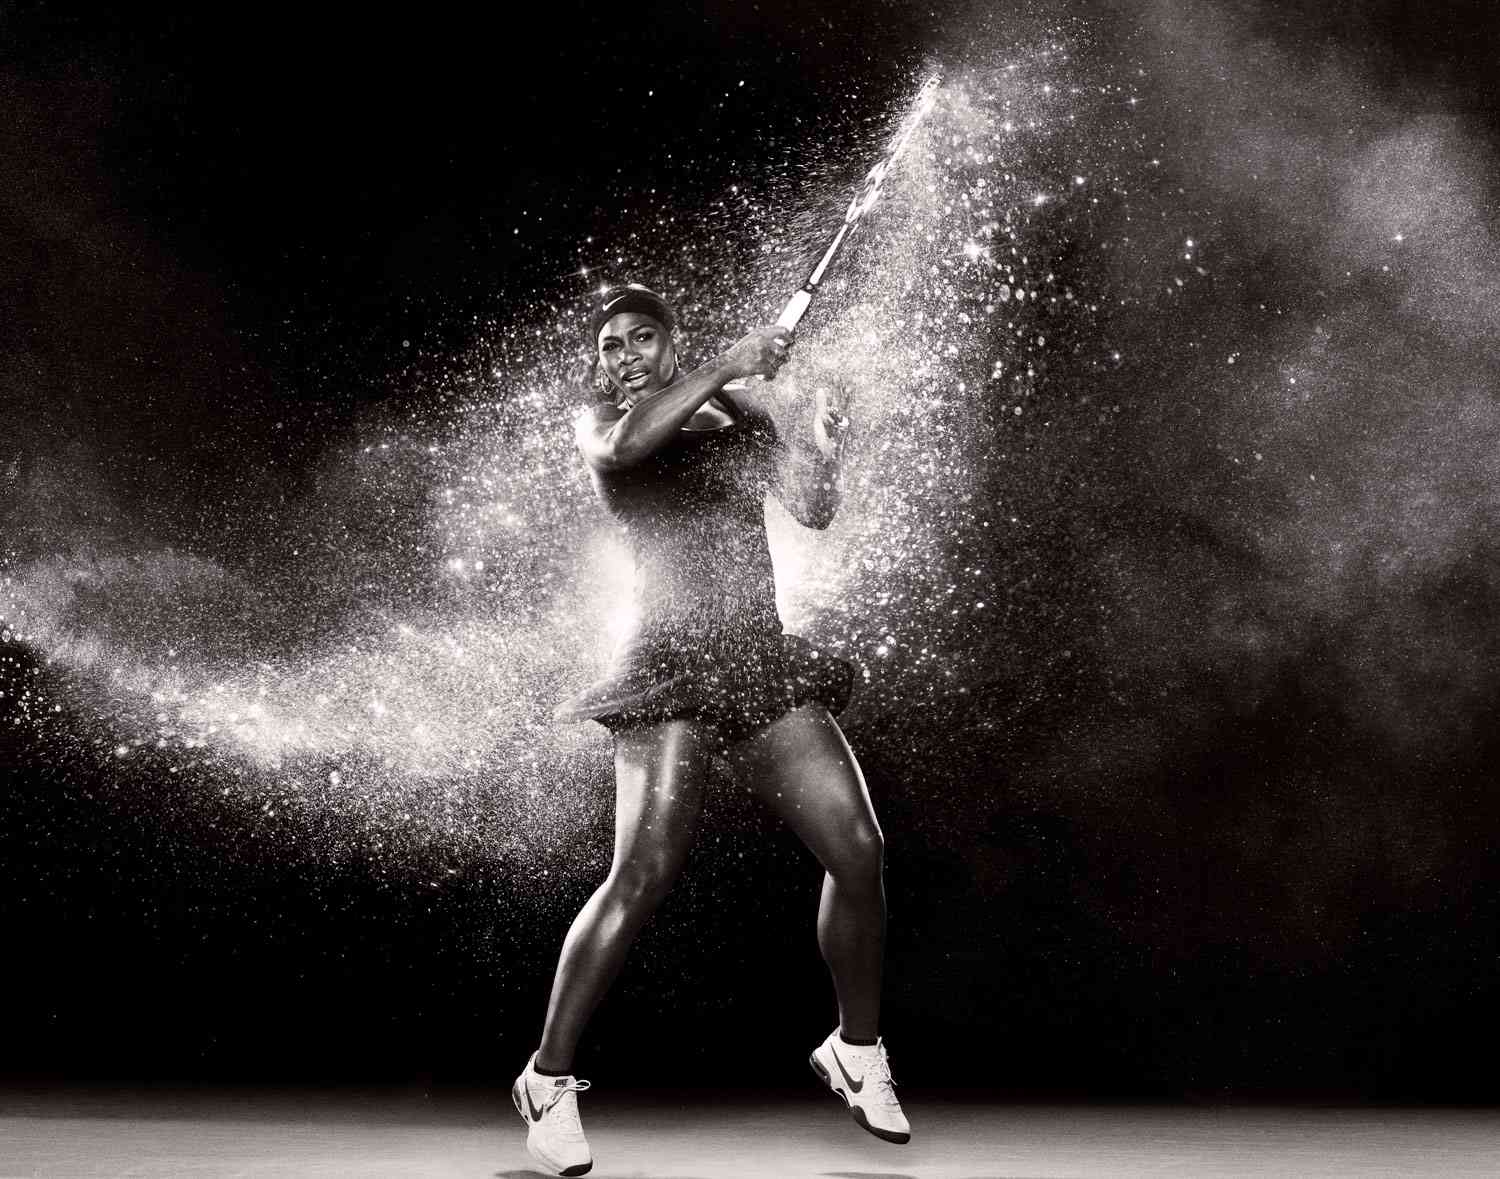 Warwick Saint is a renowned advertising photographer led worldwide Nike campaigns.